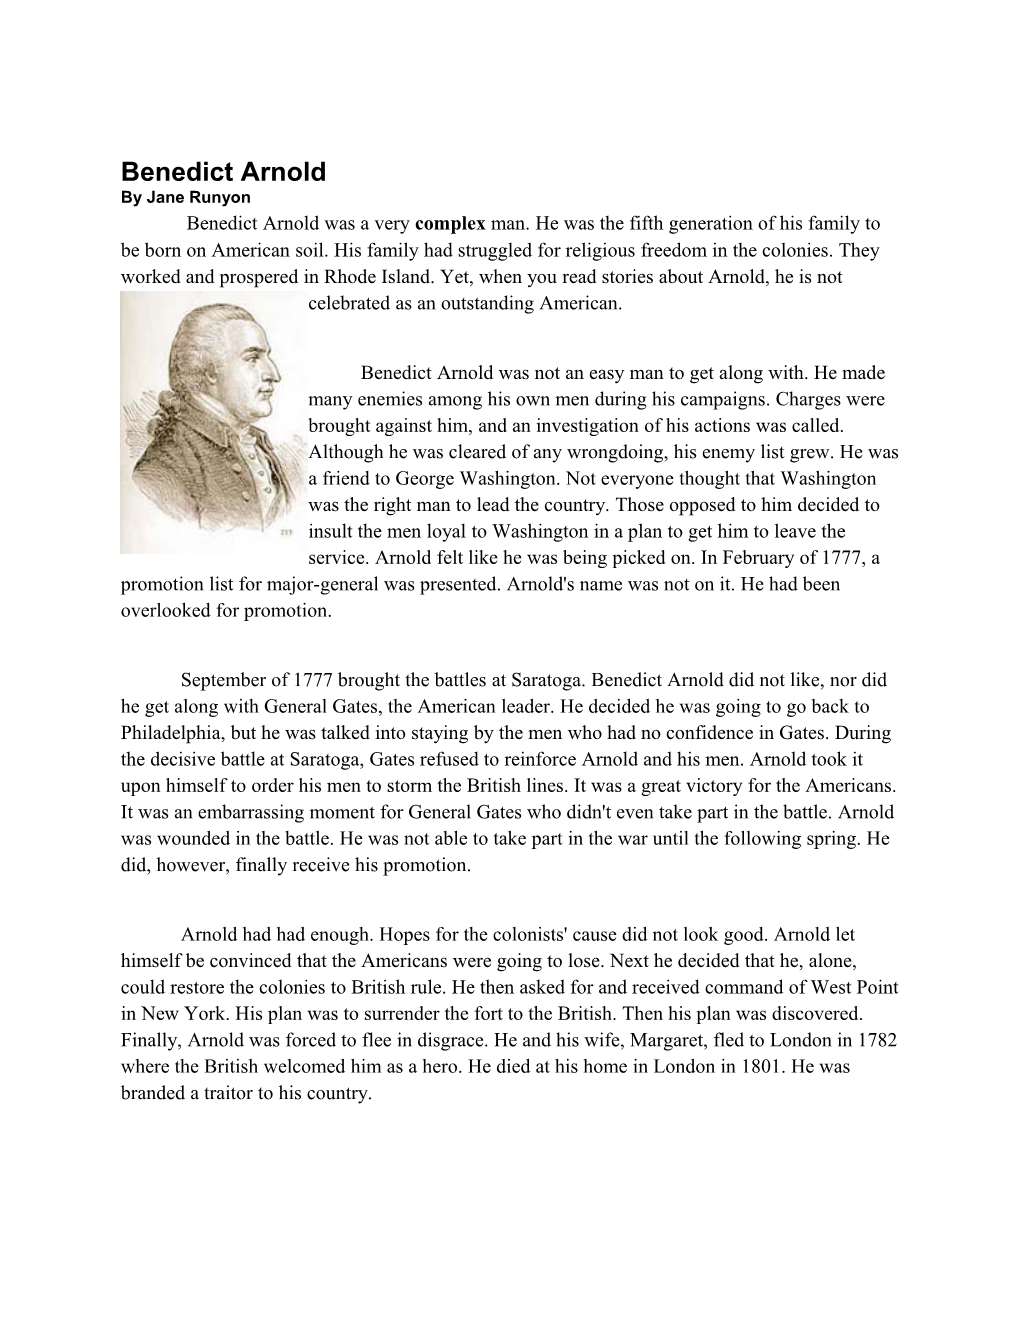 Benedict Arnold Was a Verycomplexman. He Was the Fifth Generation of His Family to Be